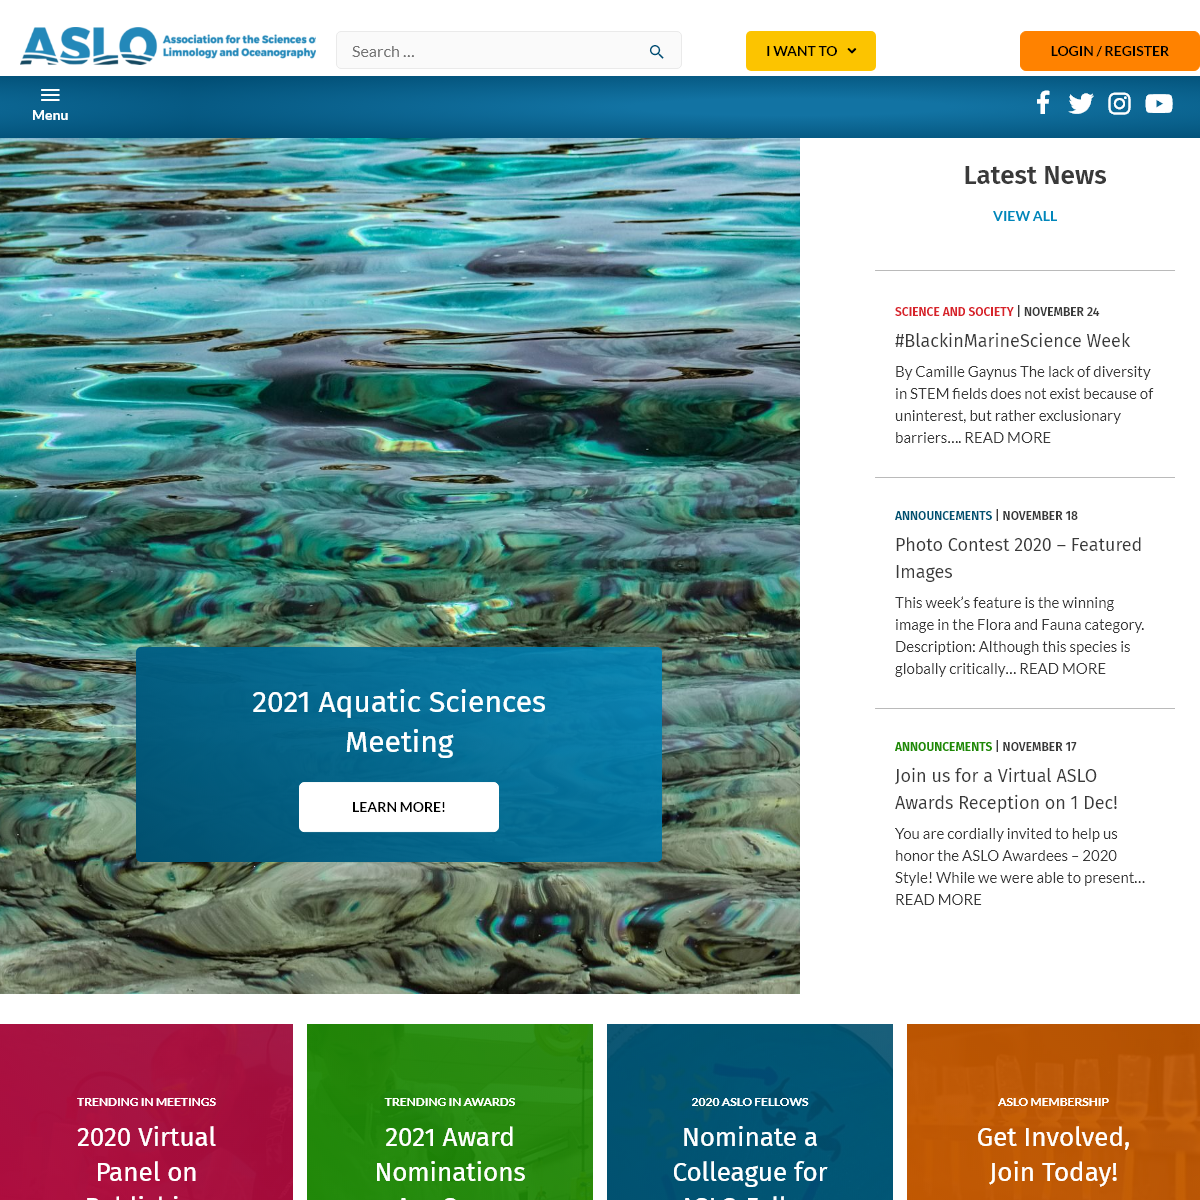 A complete backup of aslo.org